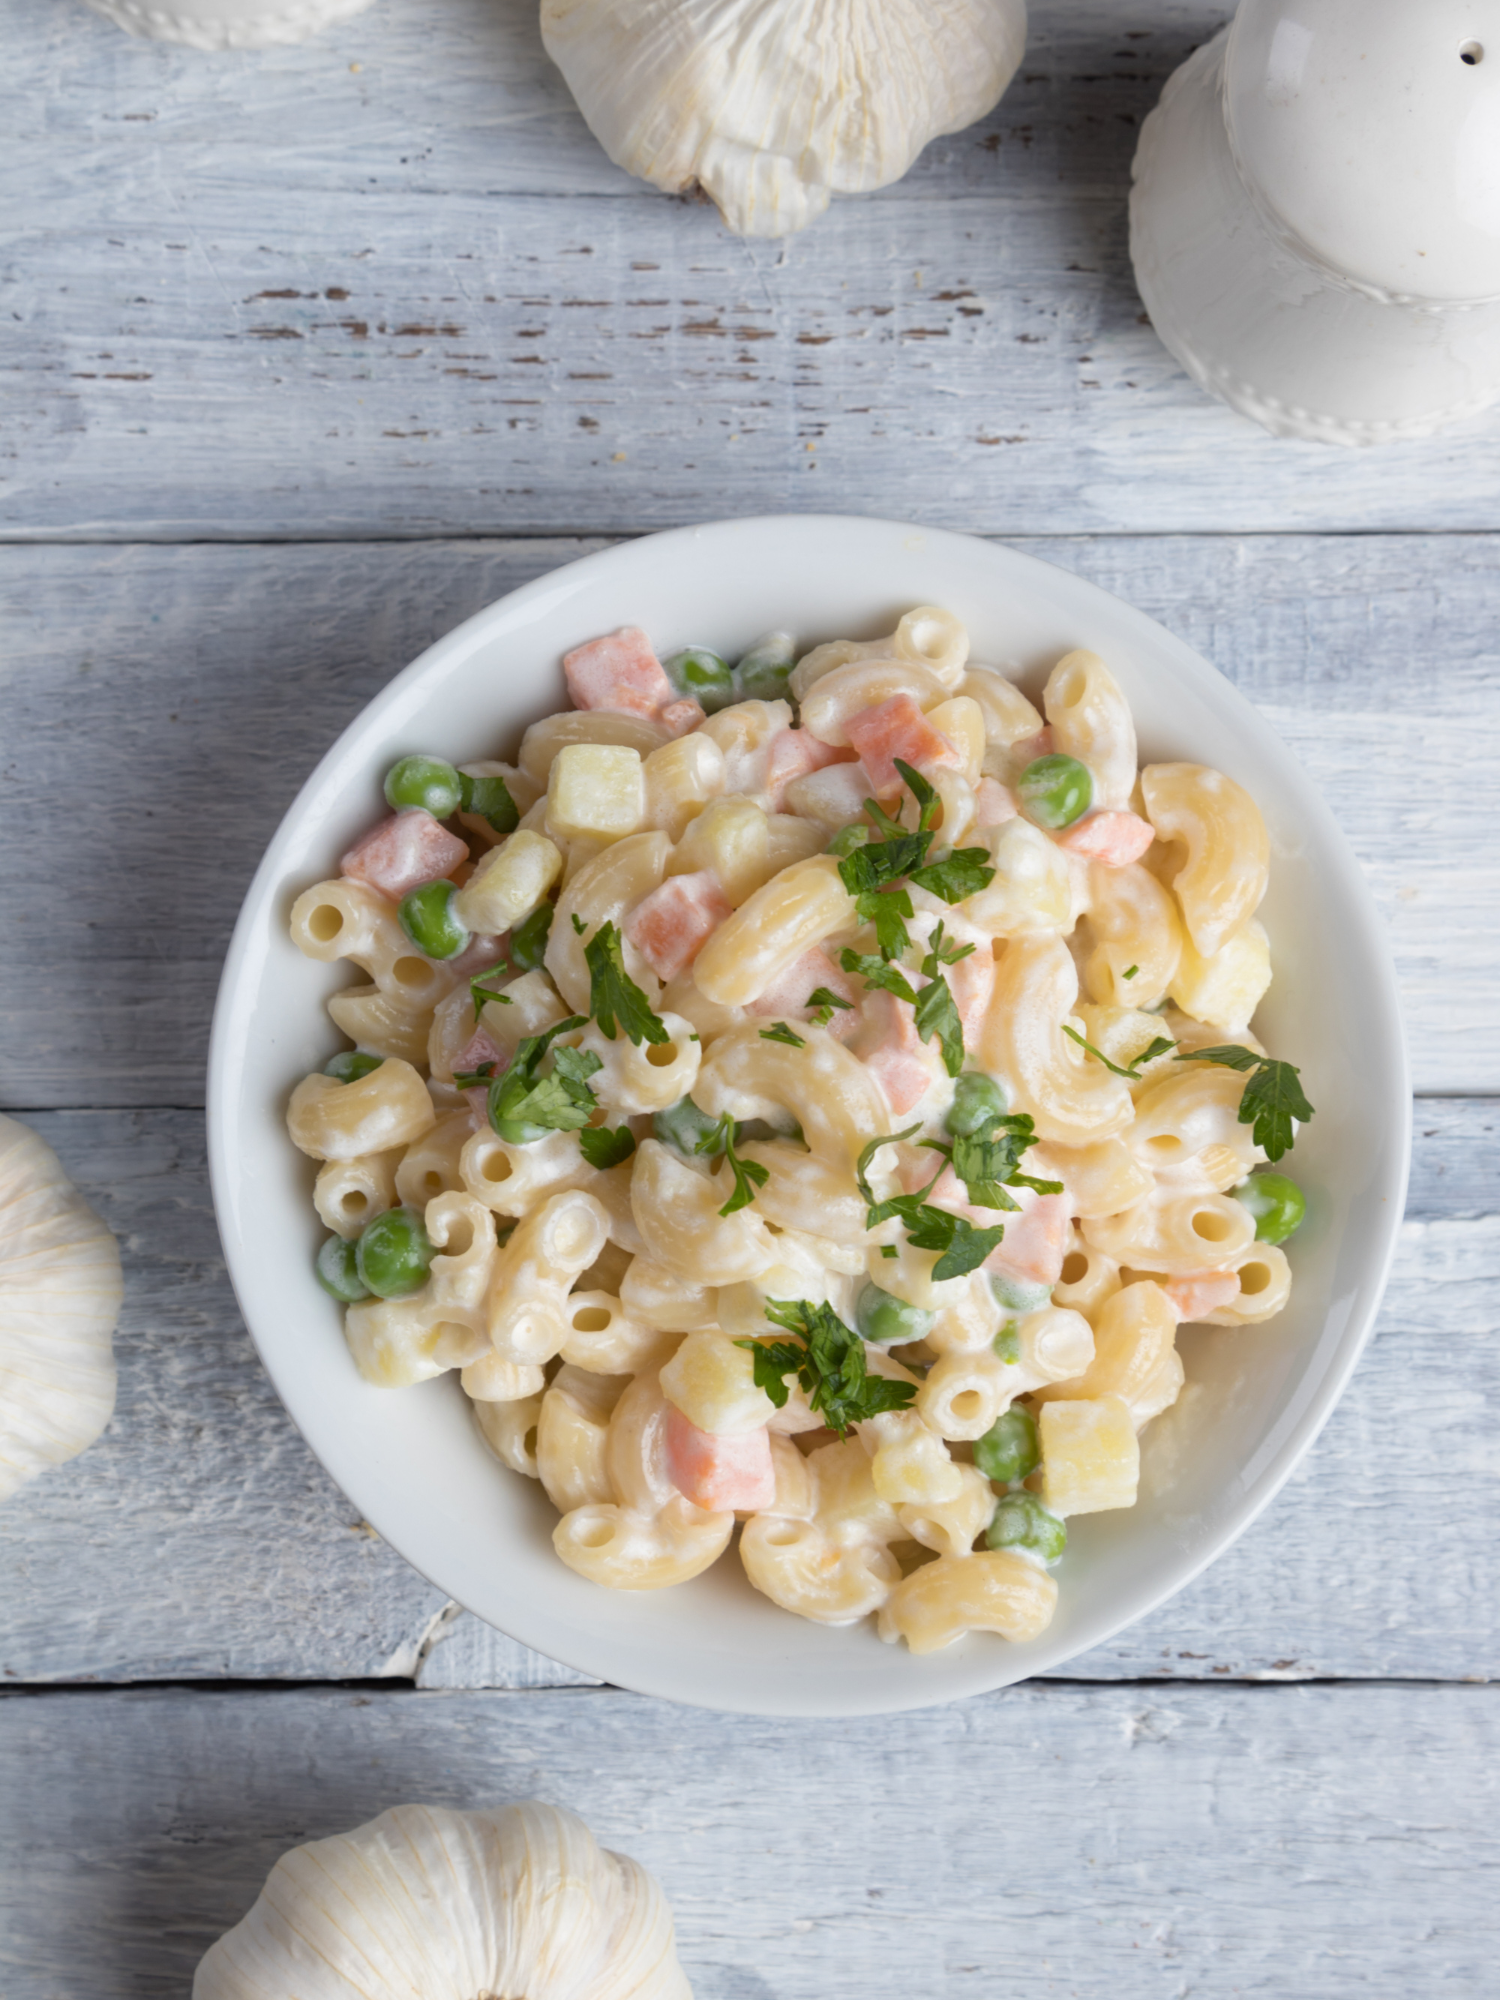 a bowl of heartburn friendly cold macaroni salad on a table